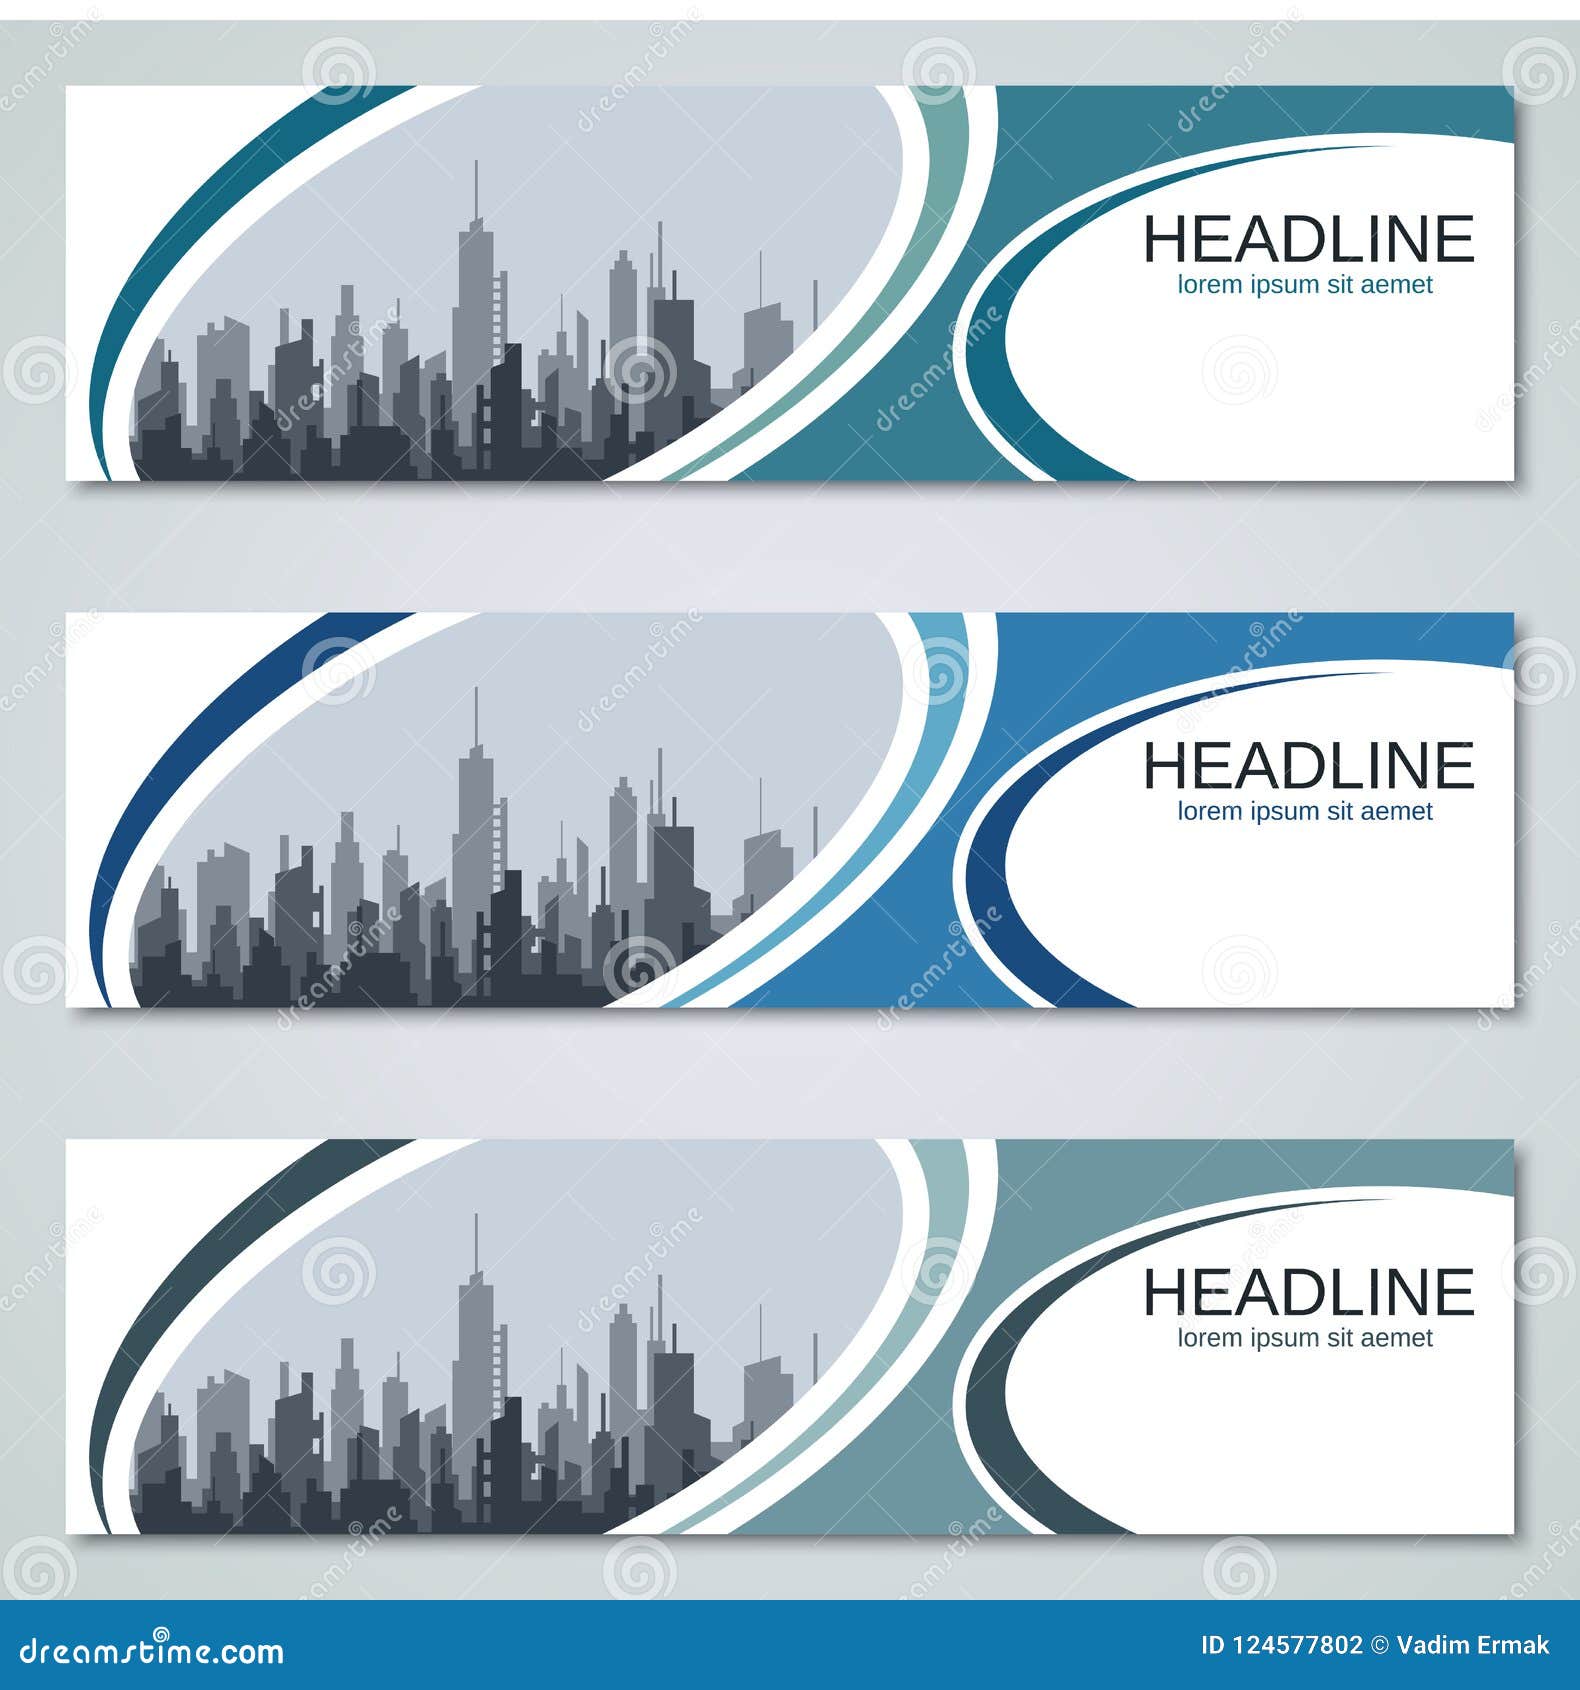 abstract urbanistic banners templates